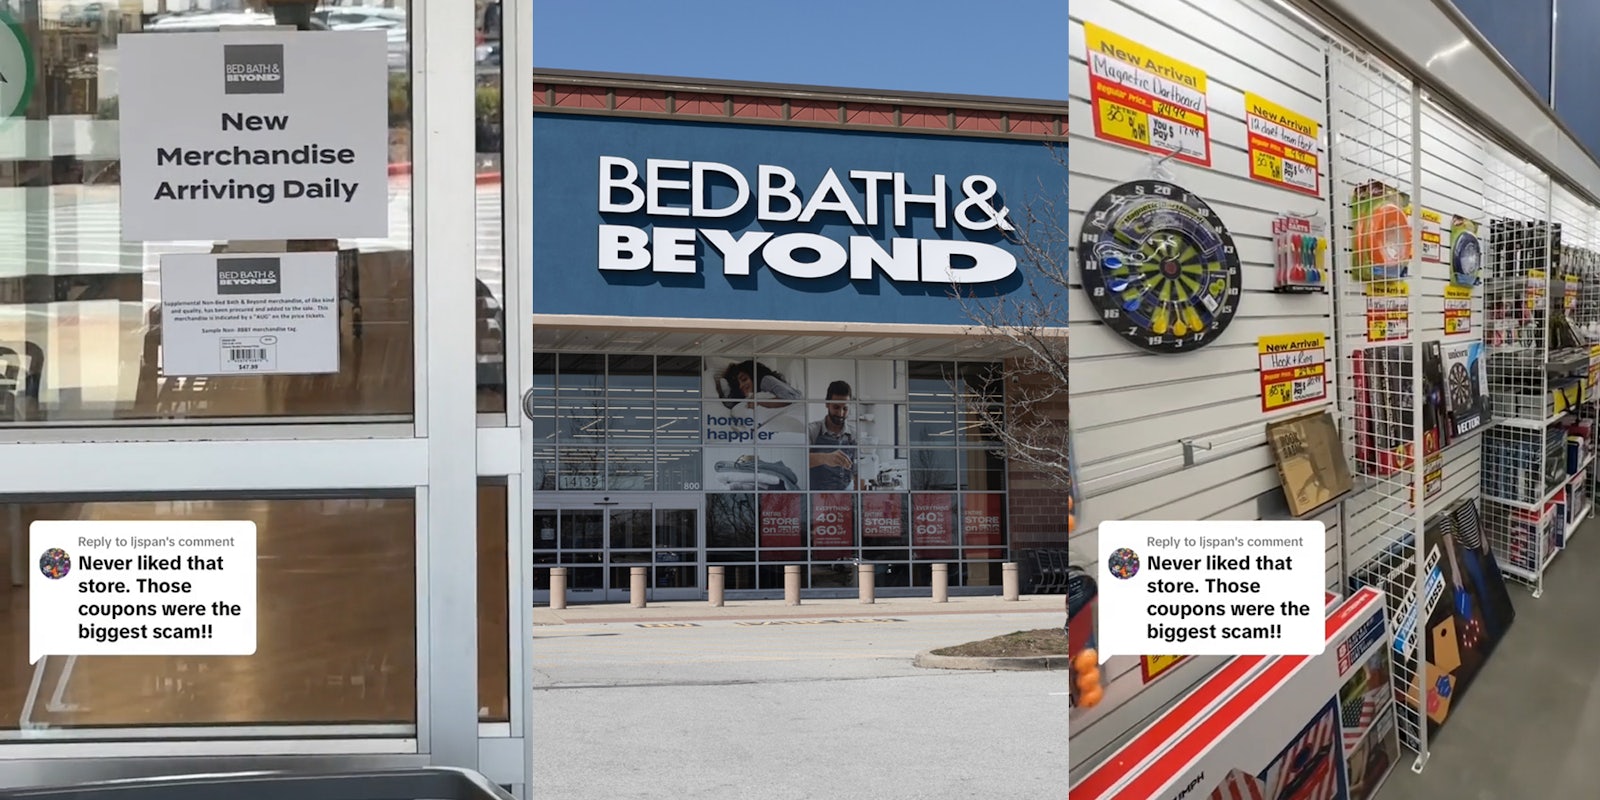 Bed Bath & Beyond sign on door with caption 'Never liked that store. Those coupons were the biggest scam!!' (l) Bed Bath & Beyond building with sign (c) Bed Bath & Beyond interior with new arrivals with caption 'Never liked that store. Those coupons were the biggest scam!!' (r)